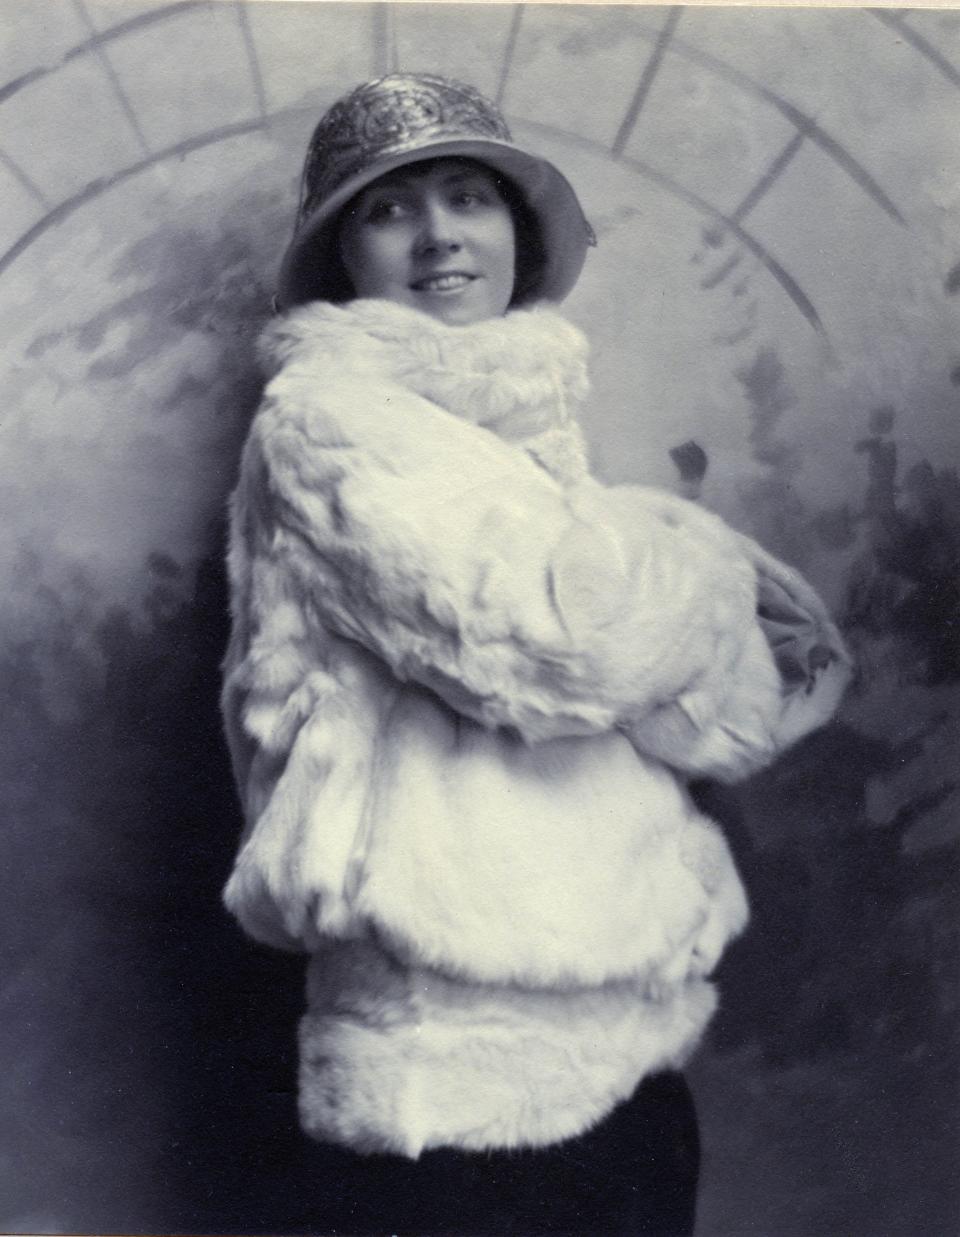 This provided photo shows South Bend's Catherine Oliver in the 1920s wearing clothing representative of the Prohibition era, which is the theme for "Bootlegger's Bash," an event The History Museum and Studebaker National Museum are presenting April 26, 2024, on their campus.